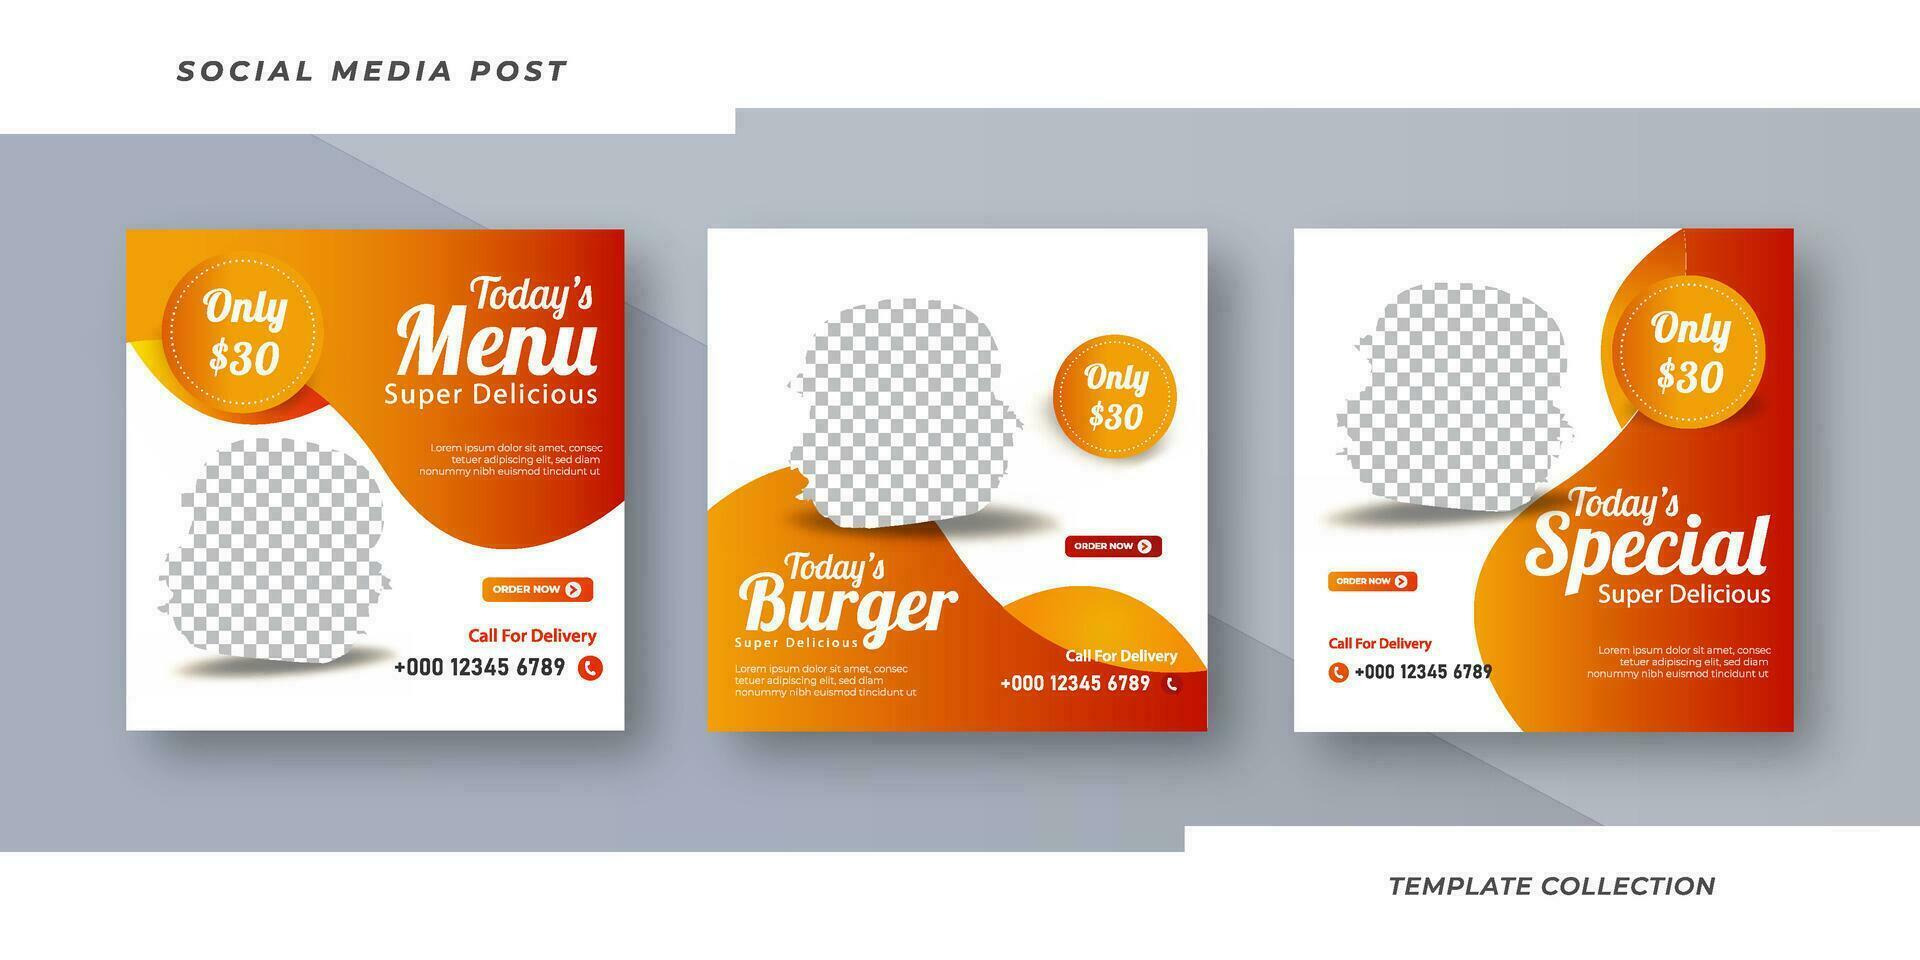 Today's Menu Burger Super Delicious  Social Media Post for Online Marketing Promotion Banner, Story Pro Vector